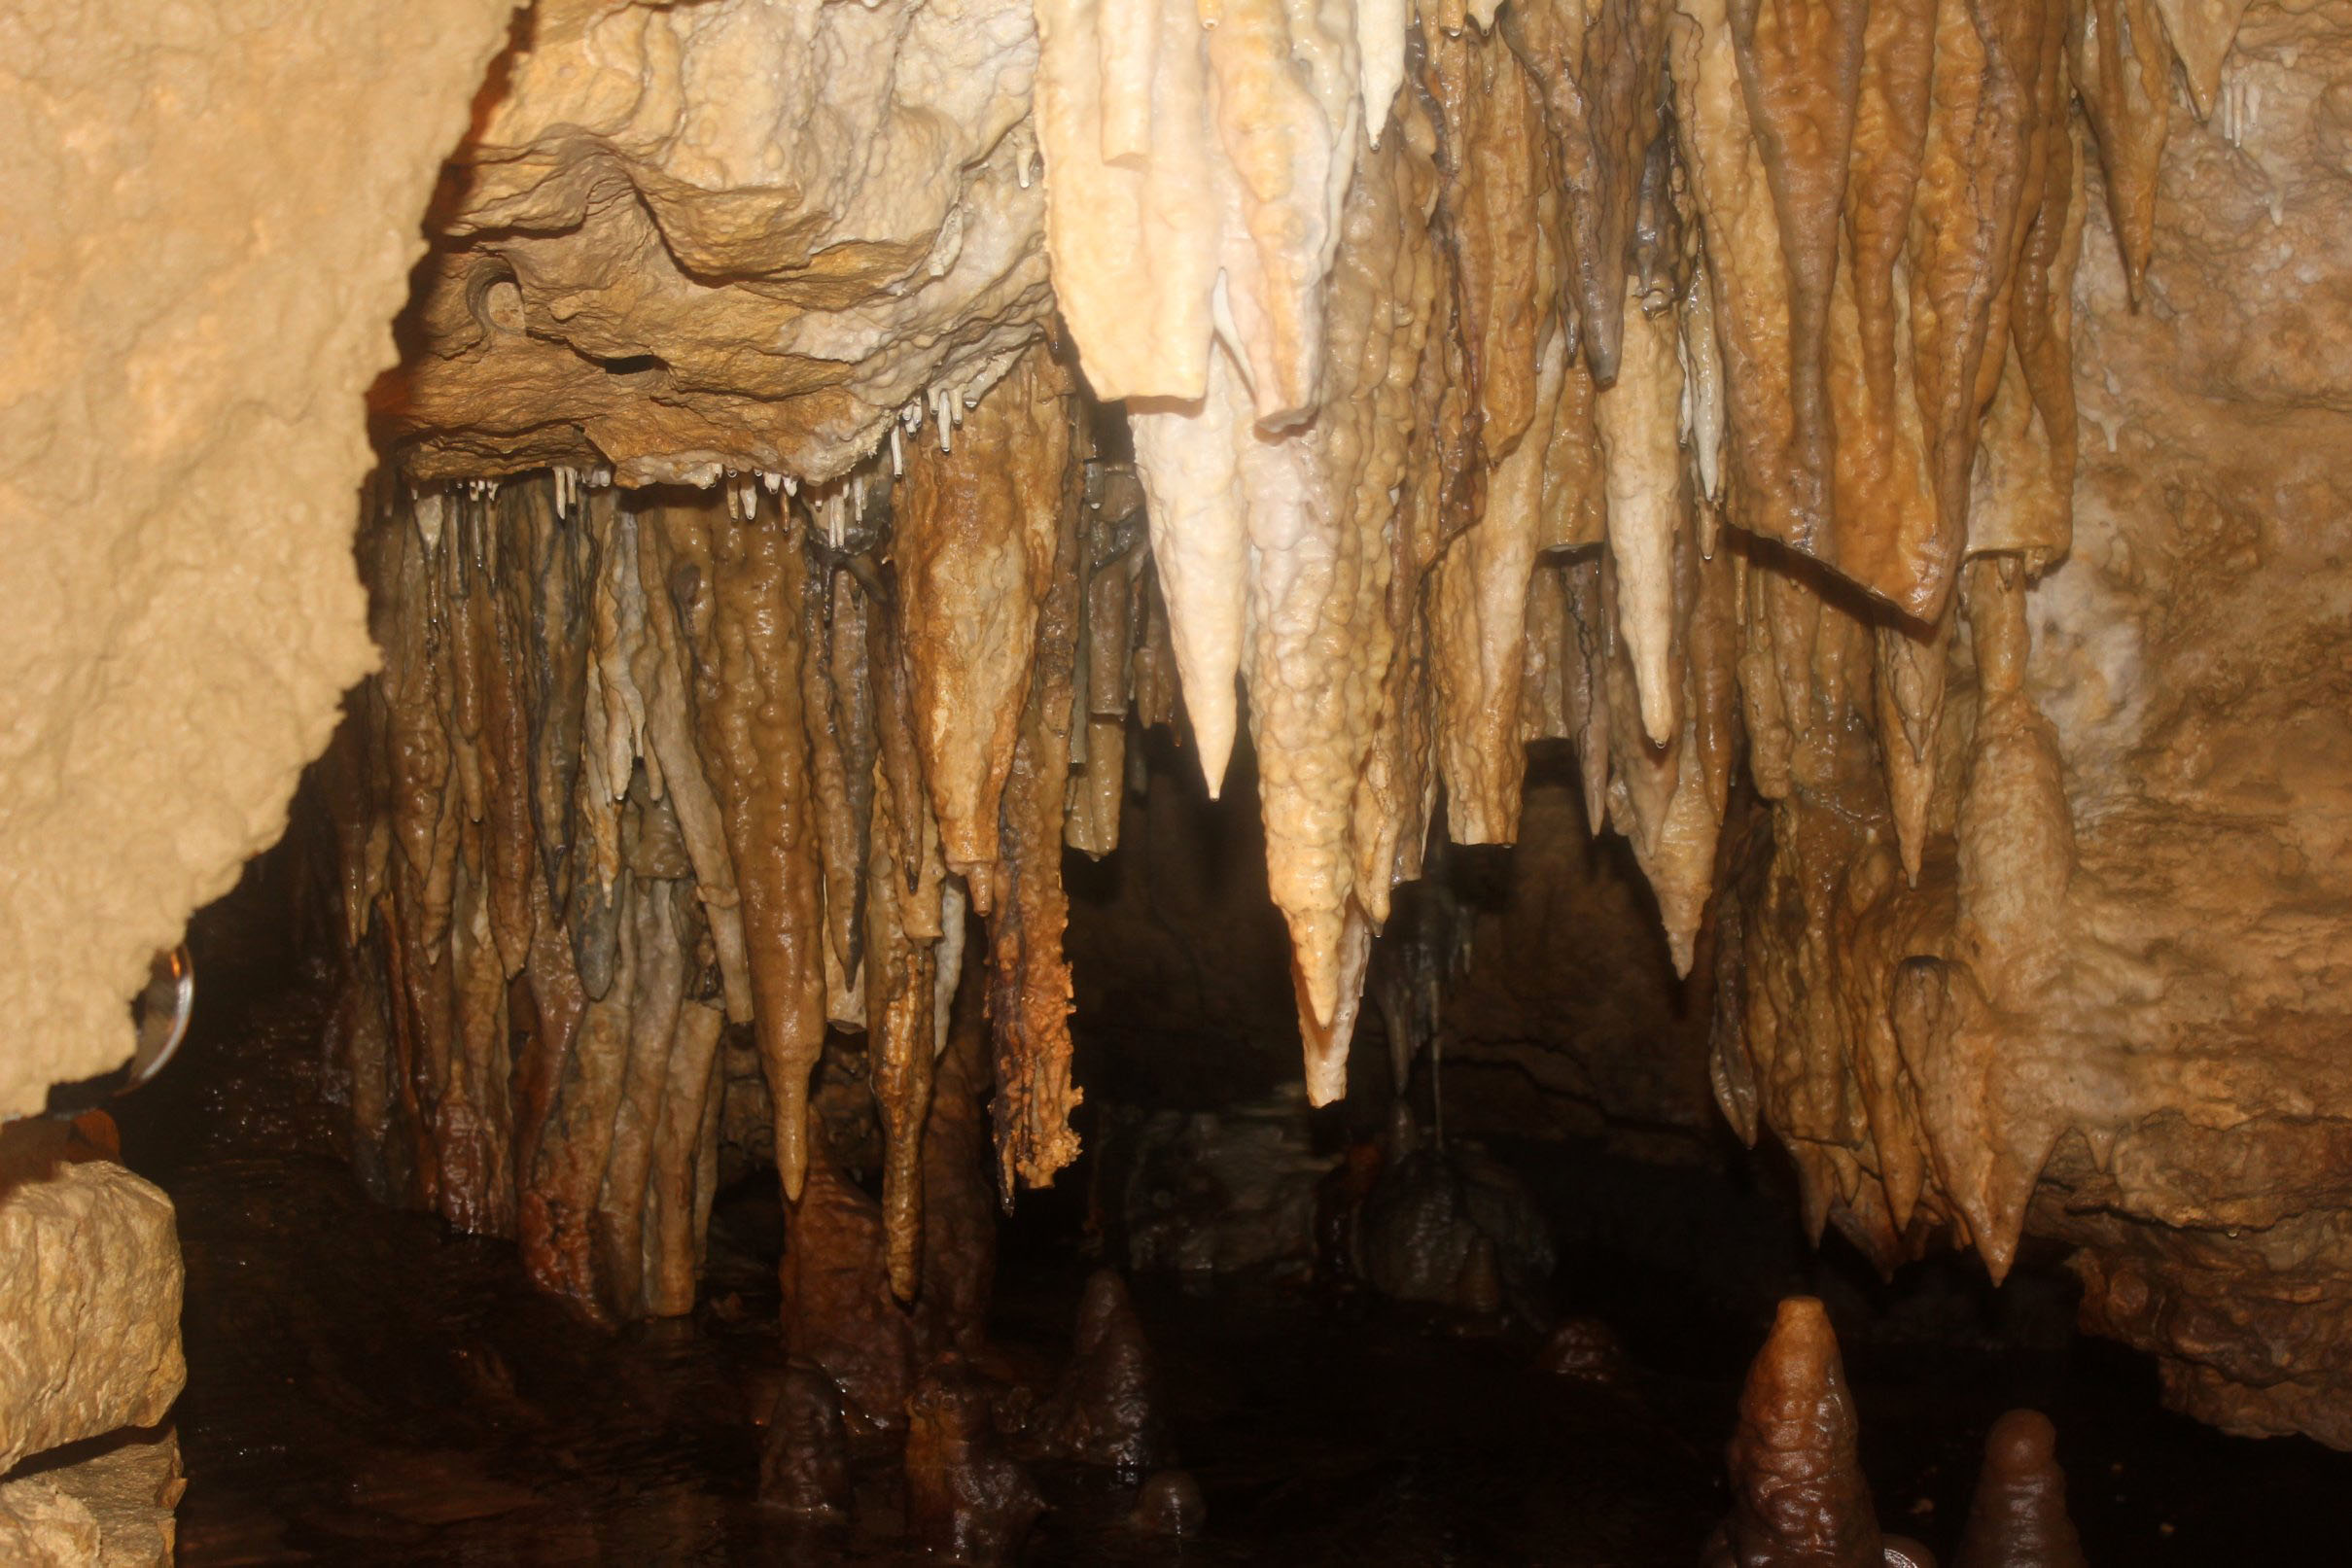 Photograph of stalactites in Cave of the Mounds, Blue Mound, Wisconsin. The photo shows a group of beige stalactites hanging from the roof o f a cave. Some appear to have had their tips broken off.